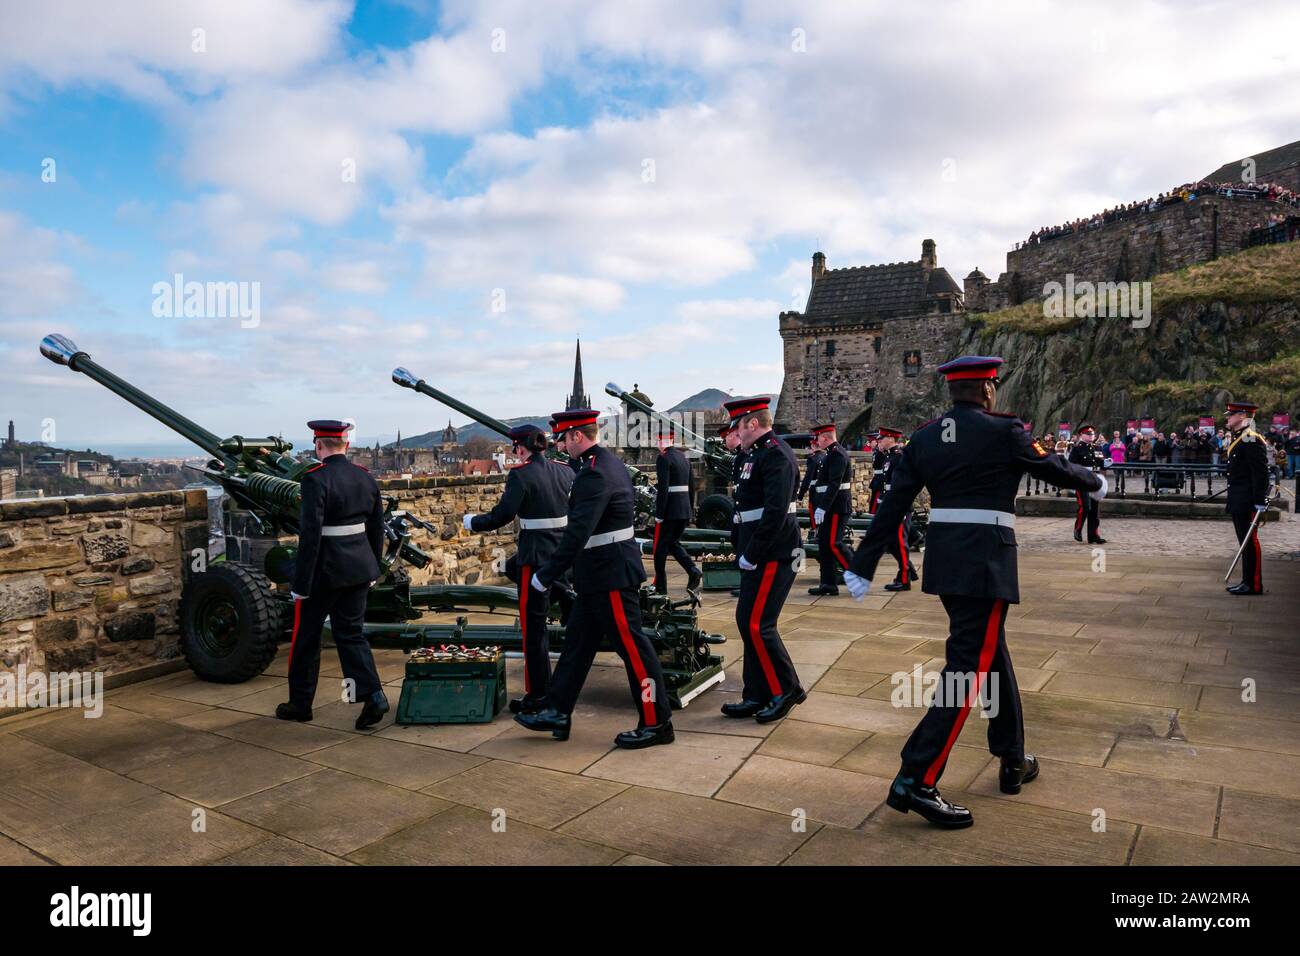 Edinburgh Castle, Edinburgh, Scotland, United Kingdom. 06th Feb, 2020. 21 Gun Salute: The salute by the 26 Regiment Royal Artillery on Mills Mount marks the occasion of the HM Queen's accession to the throne on 6th February 1952, 68 years ago, The artillery regiment prepare the L118 light guns Stock Photo